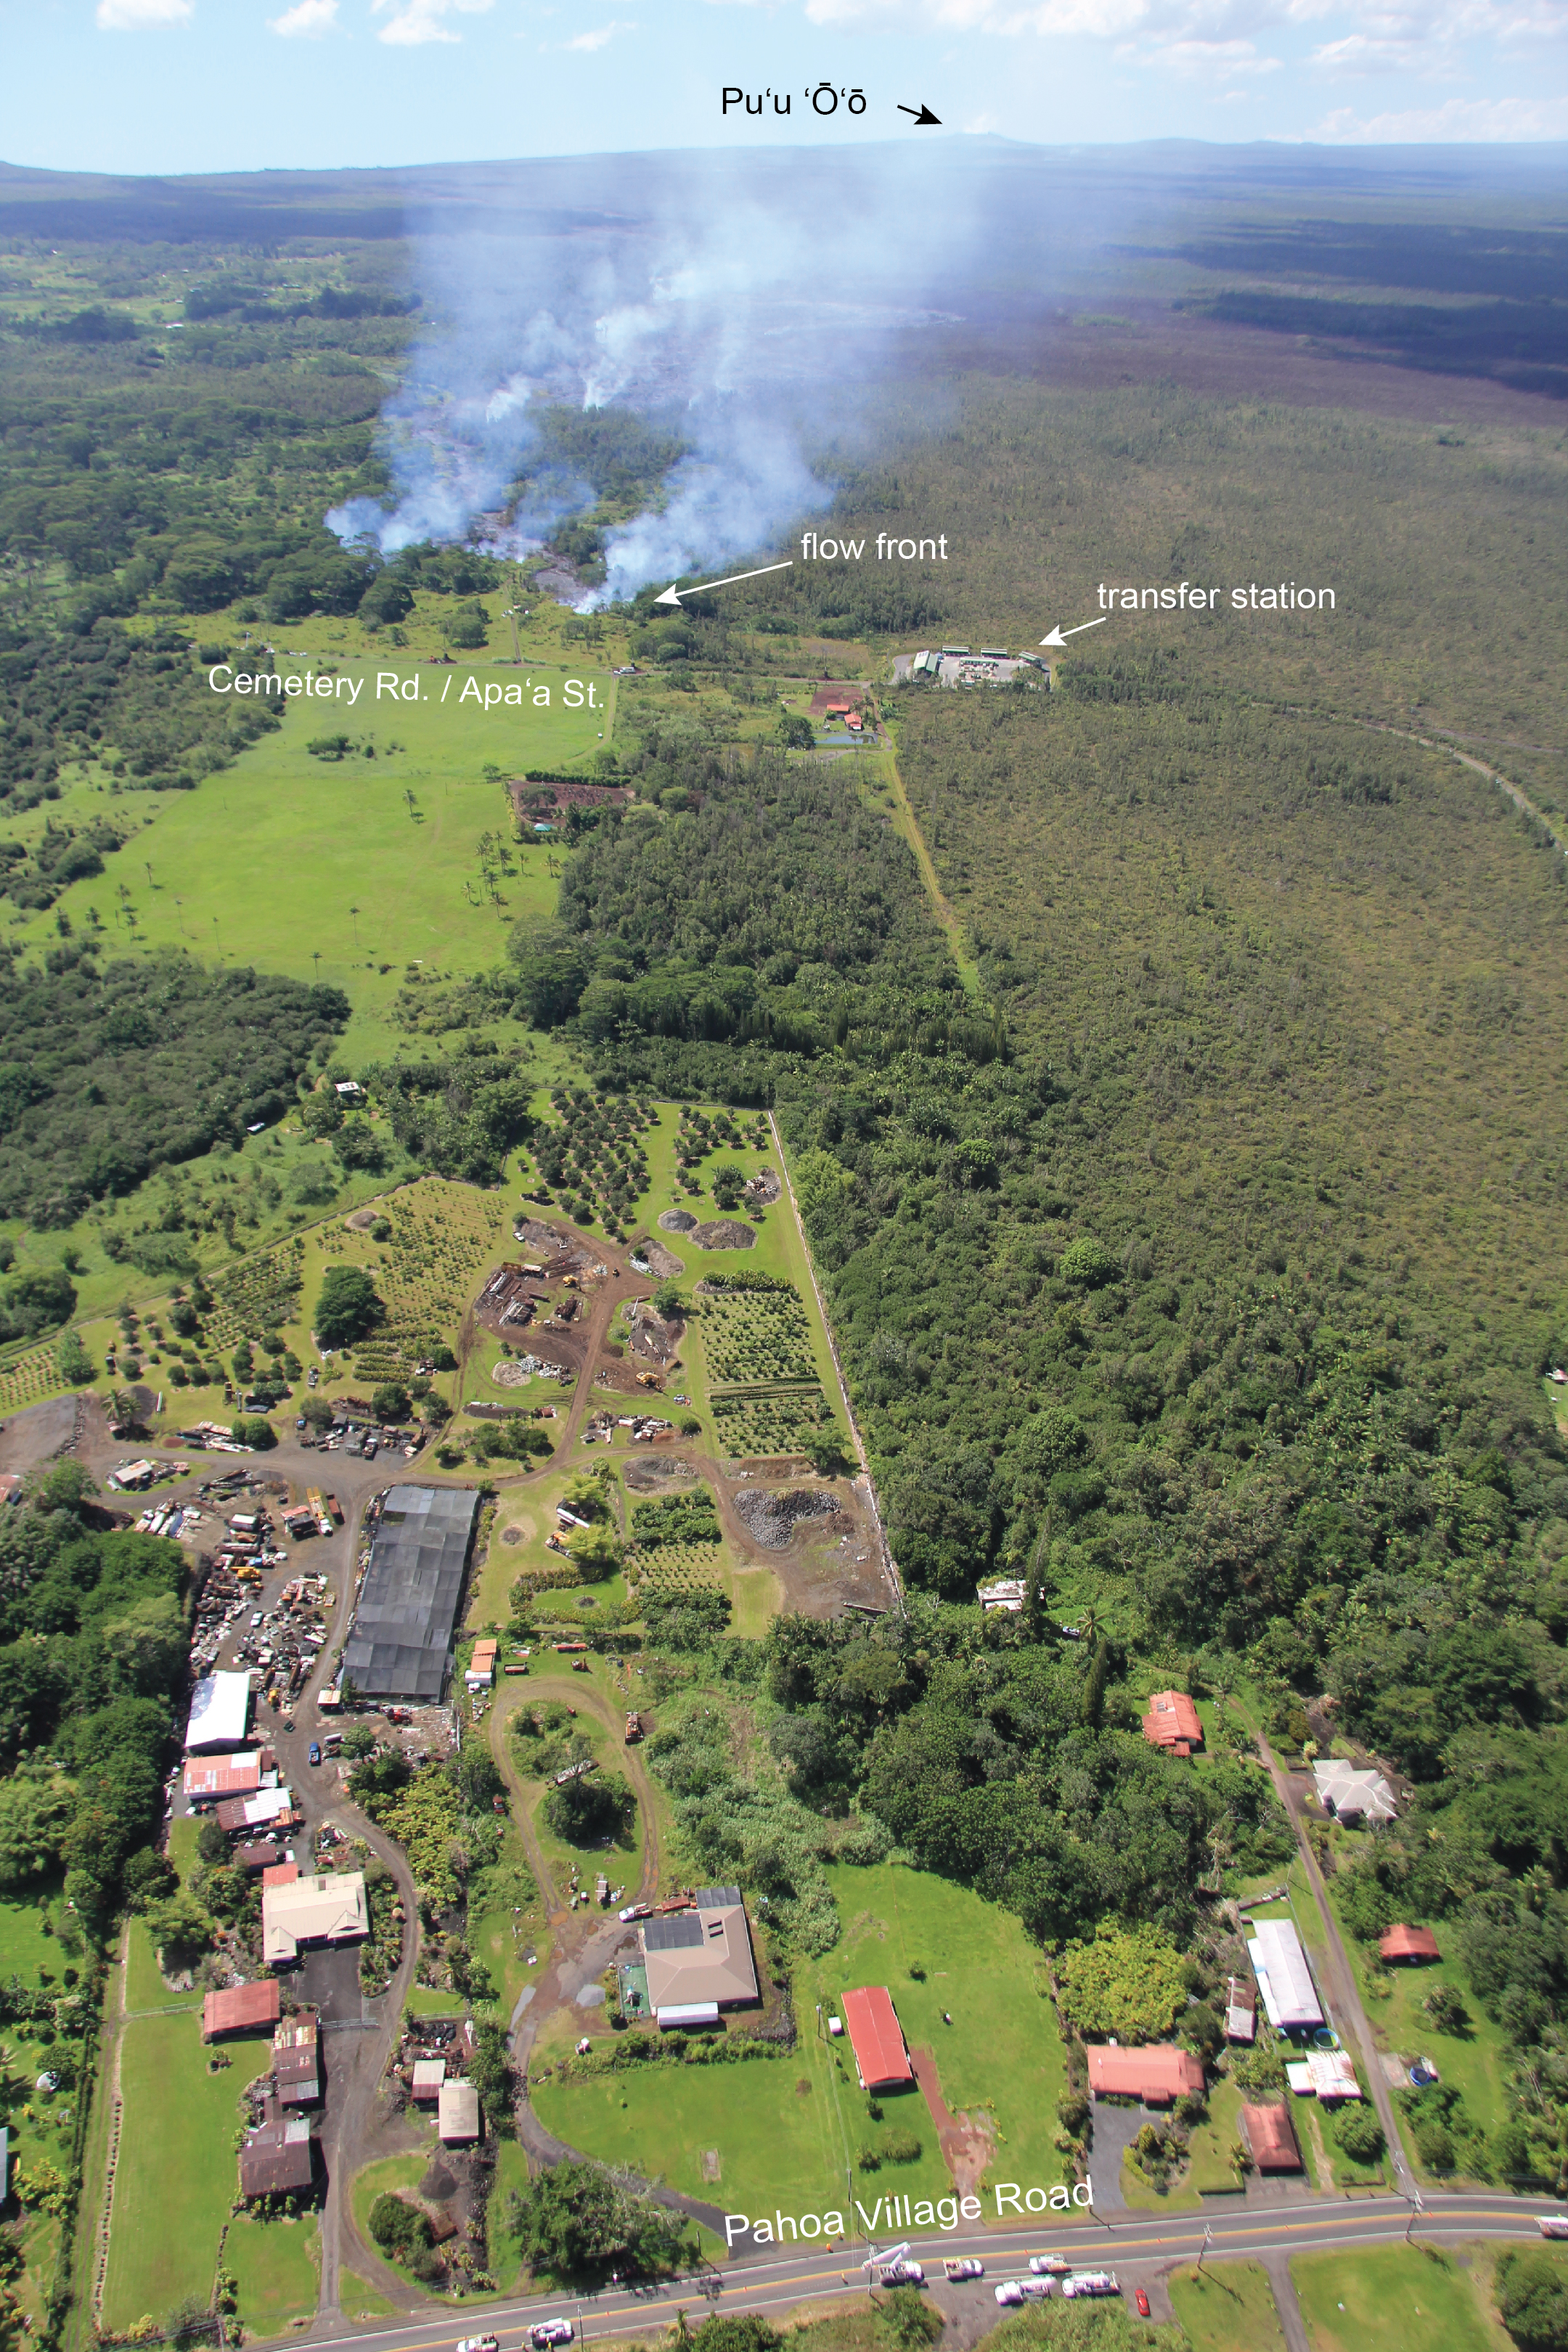 USGS HVO: A wider view of the flow front, and its position relative to Pāhoa. This morning the flow front was 1.2 km (0.7 miles) from Pāhoa Village Road, as measured along a straight line. Pāhoa Village Road is at the bottom of the photograph.